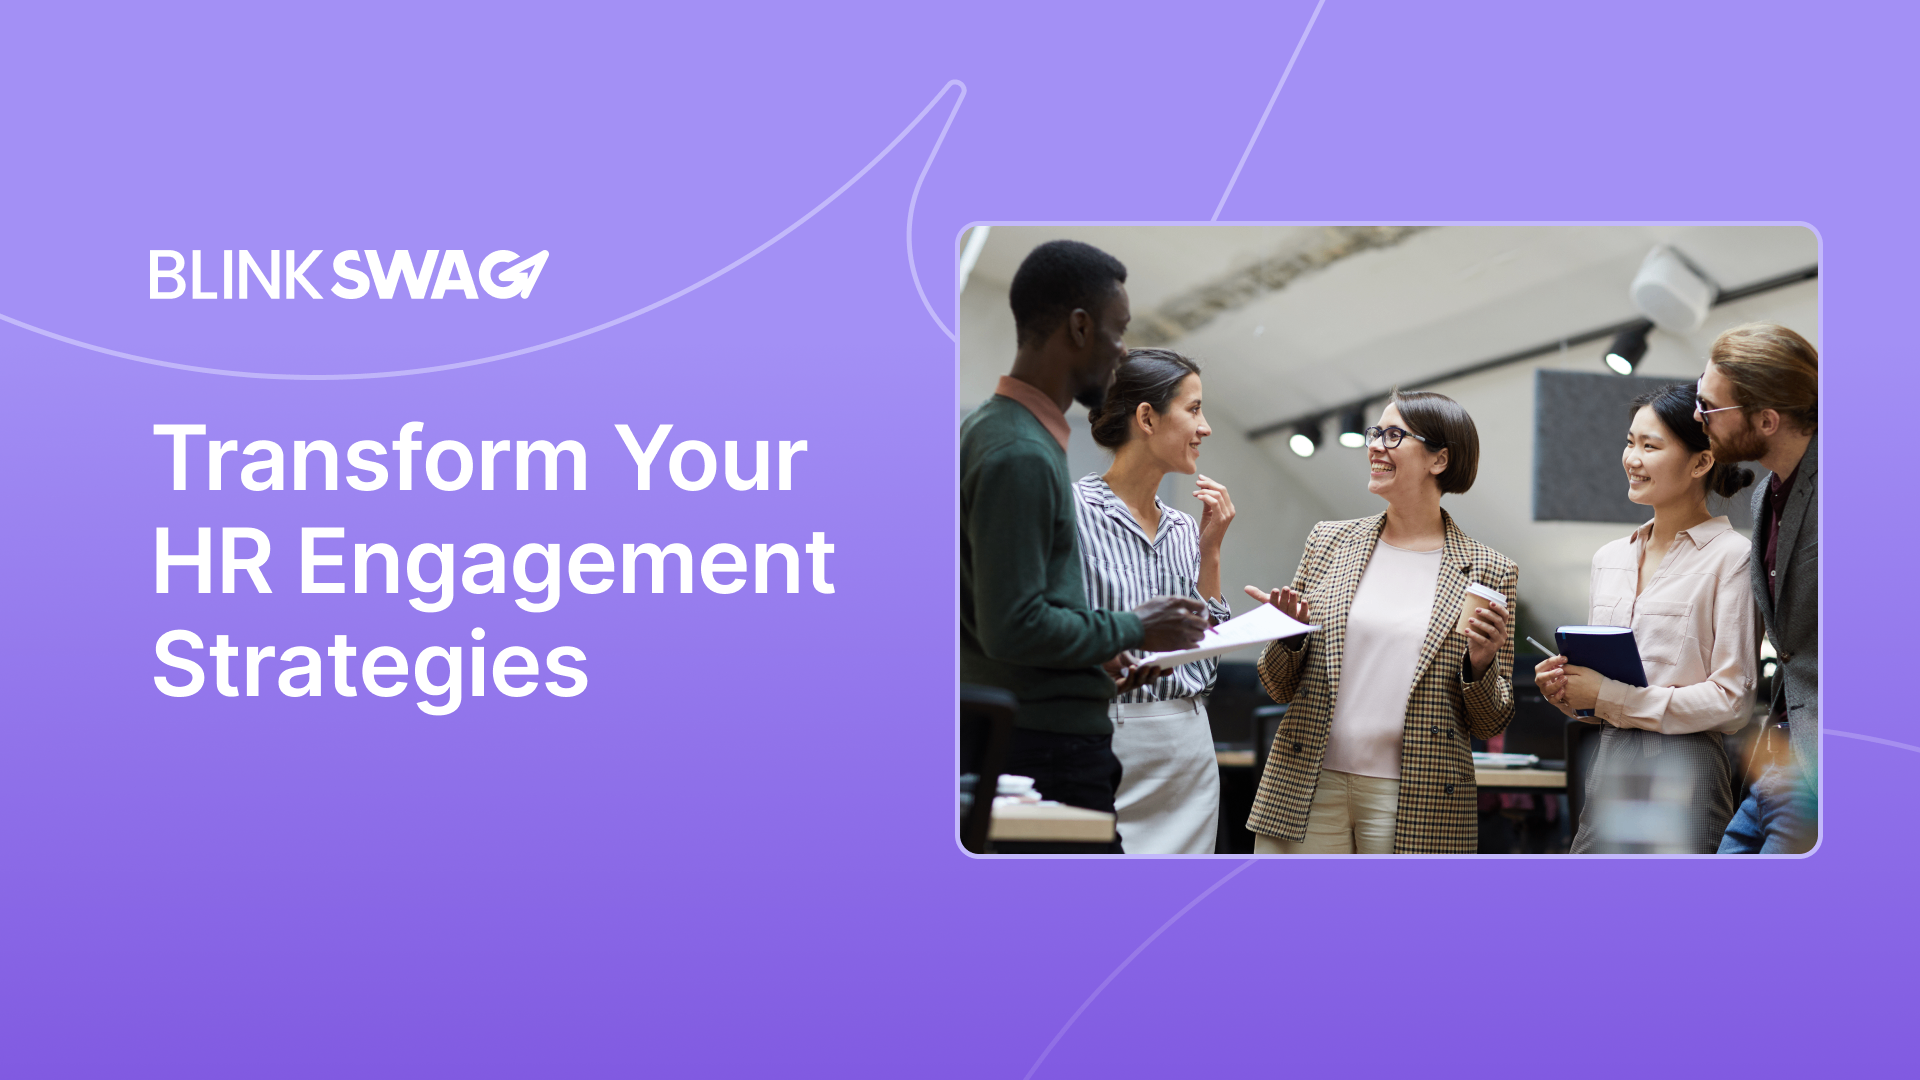 Transform Your HR Engagement Strategies with Blinkswag